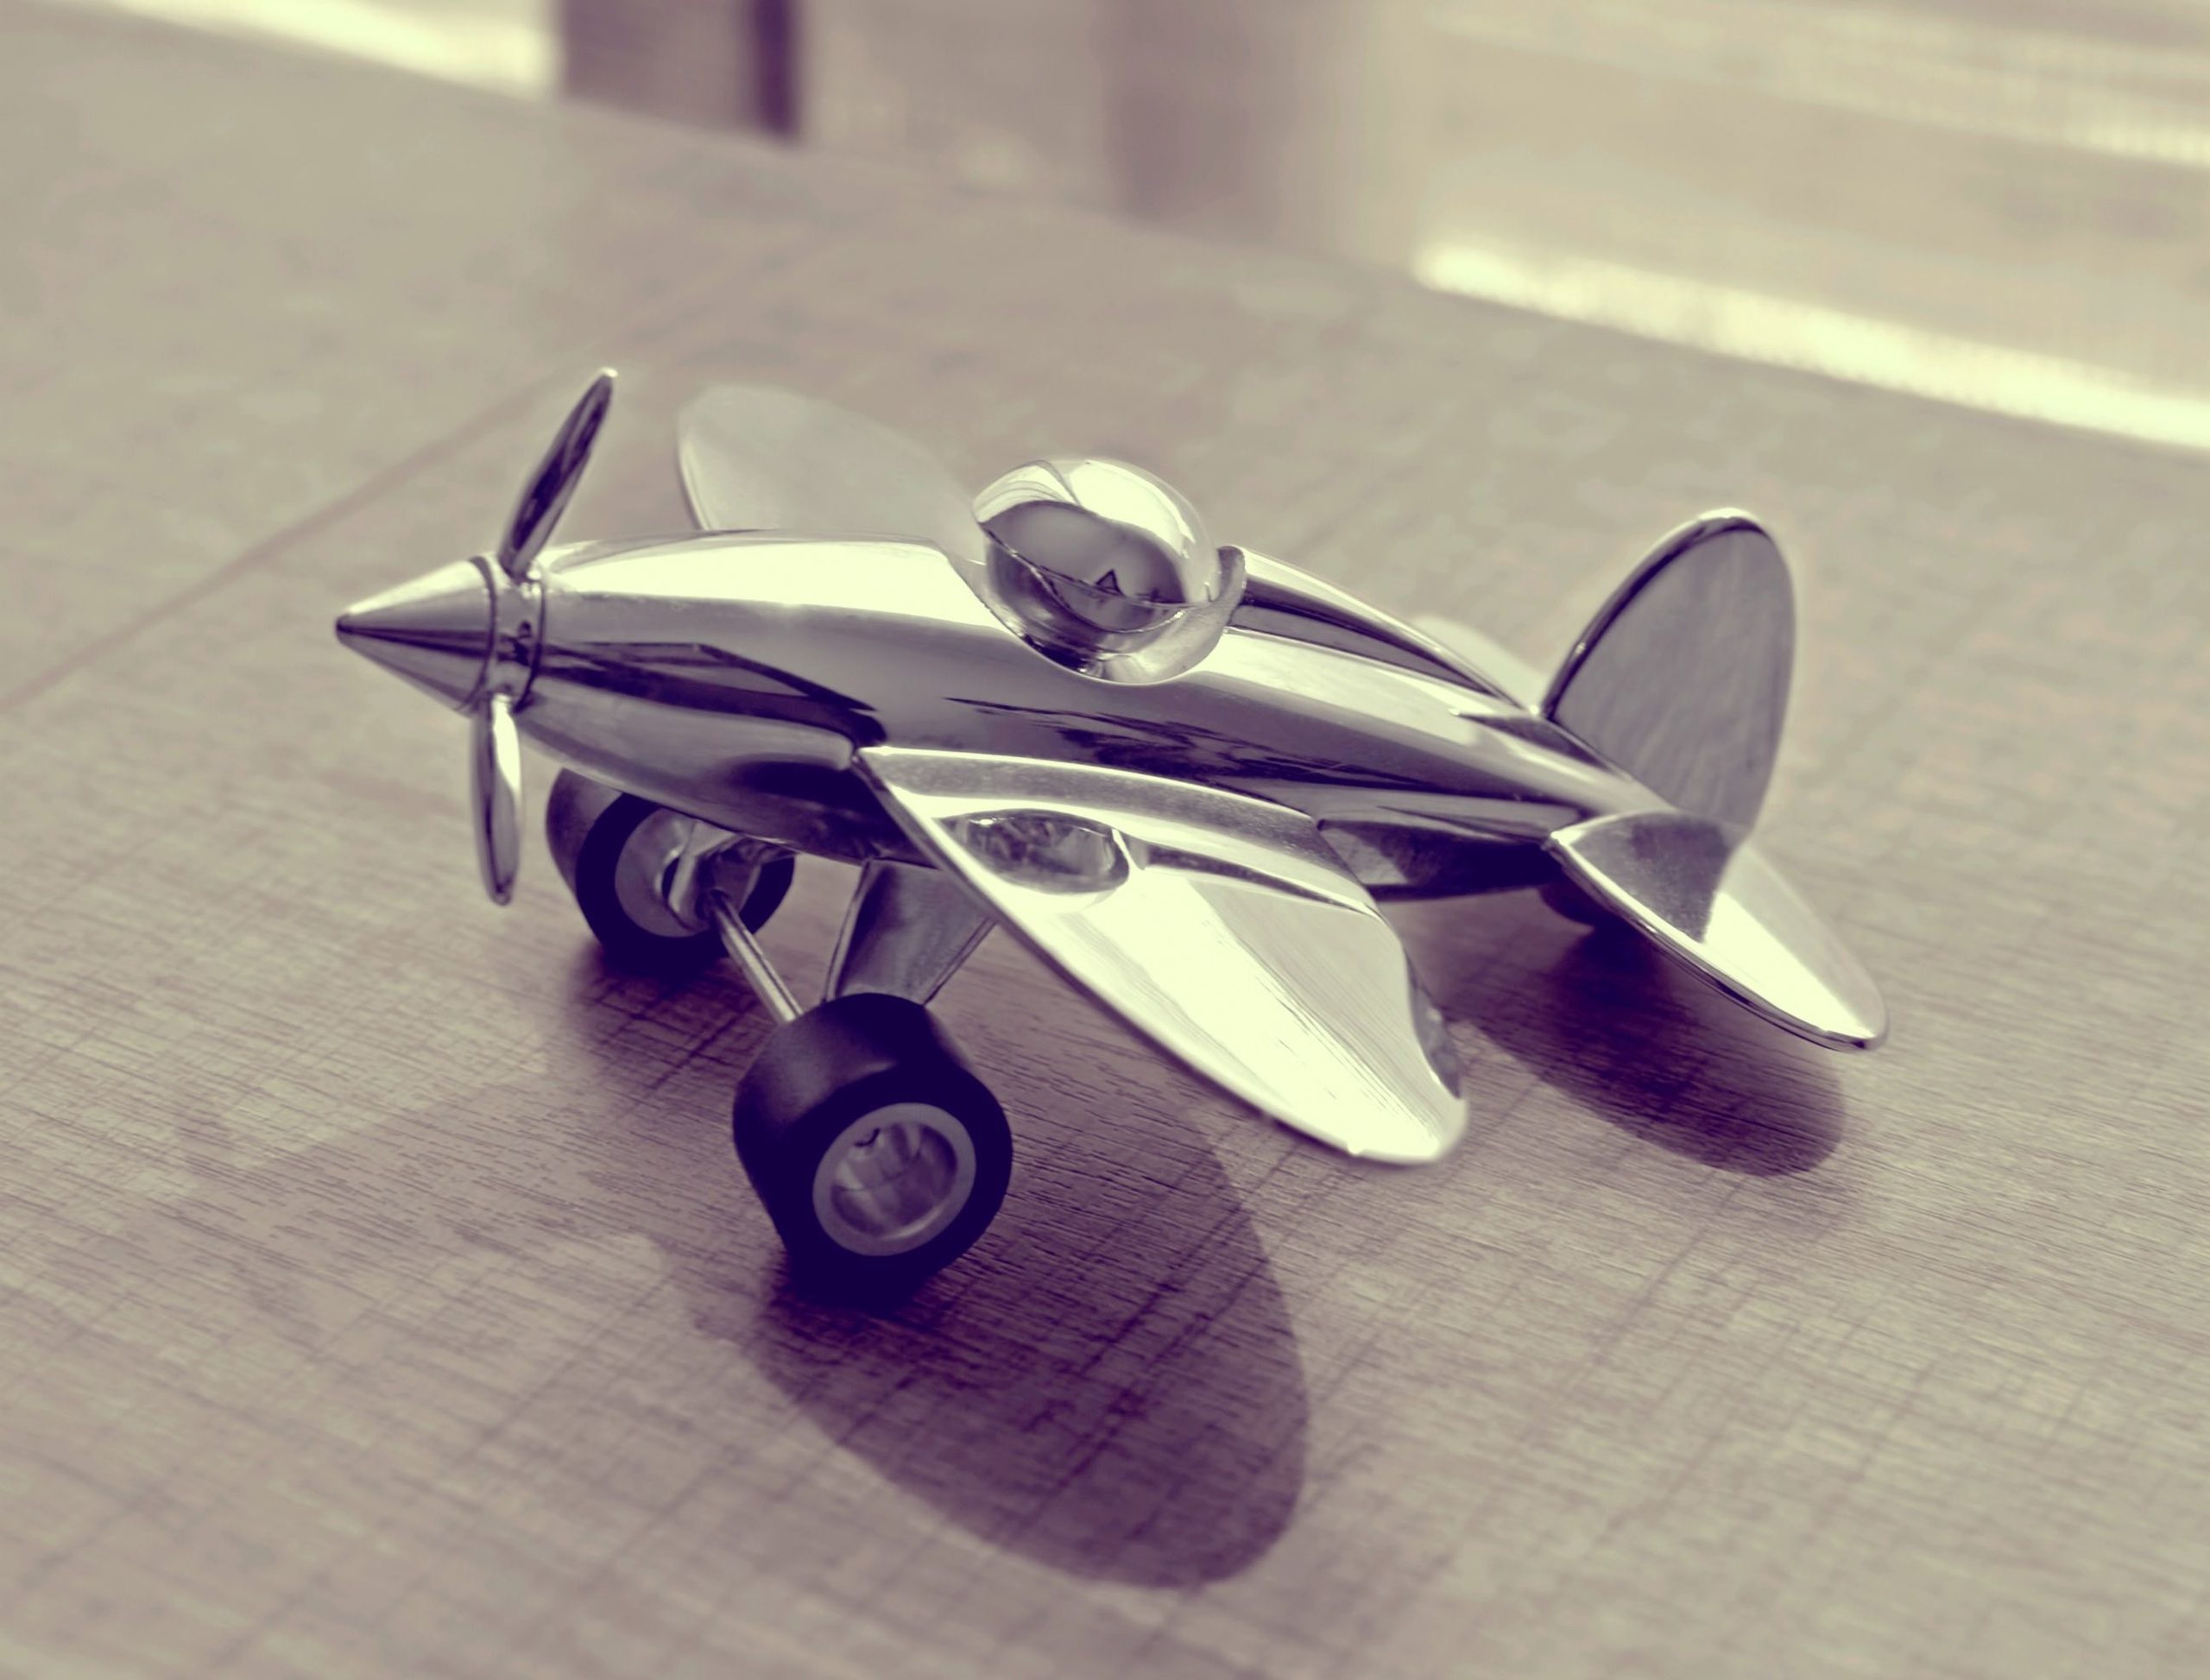 Product development like a shiny new toy airplane